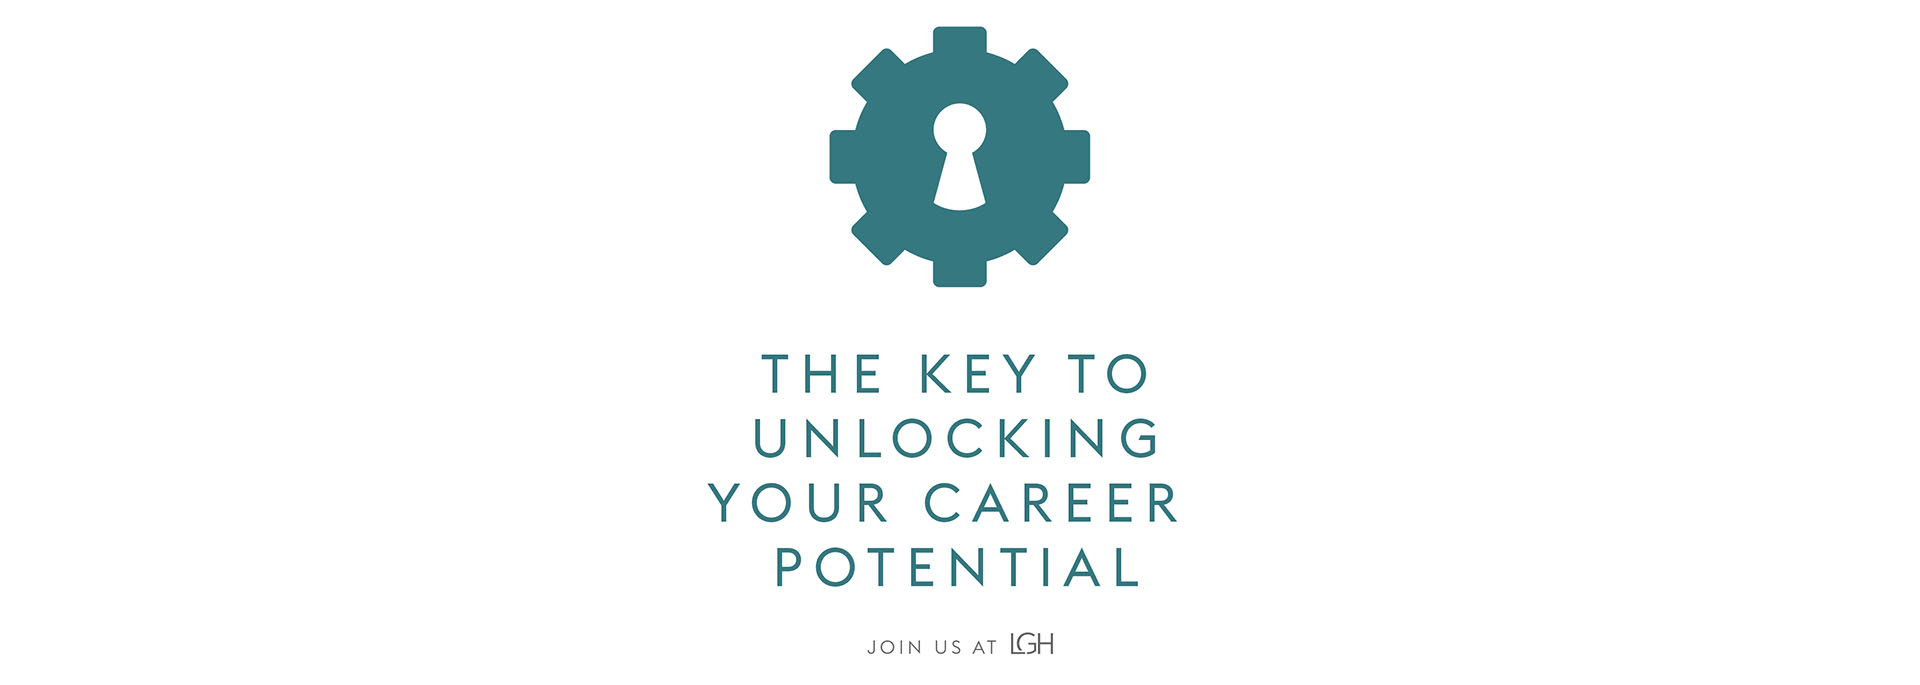 The Key to Unlocking Your Career